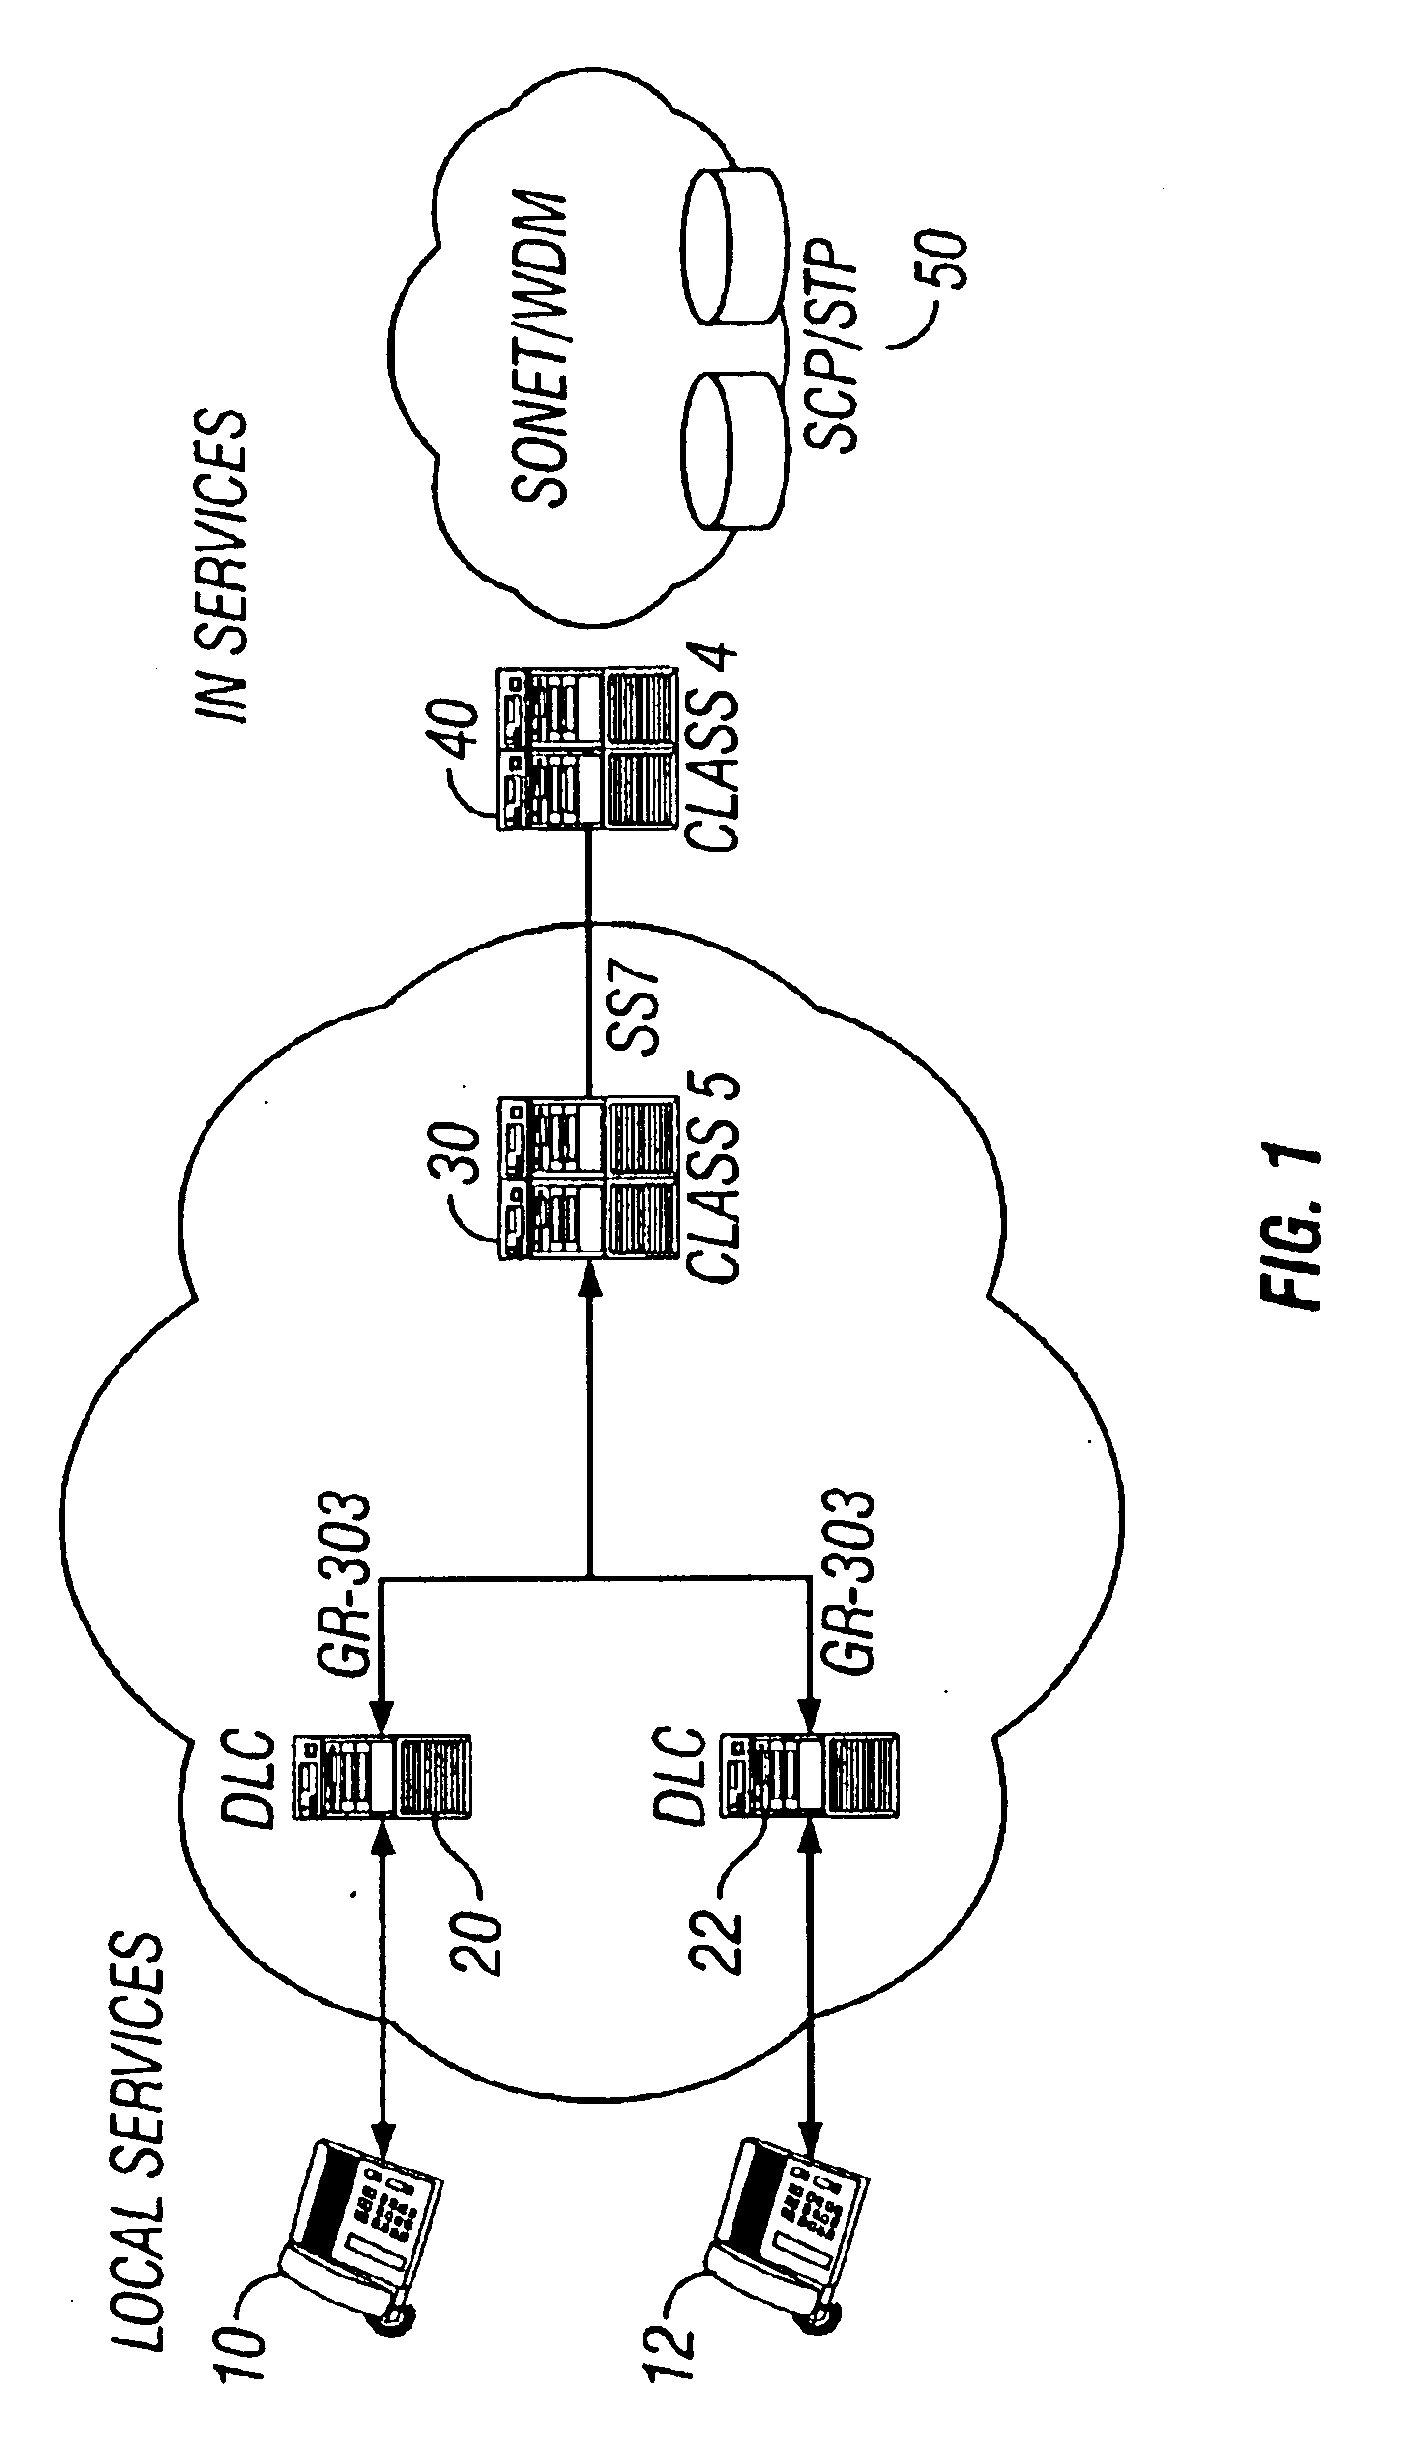 Method and apparatus for inter-working line side signaling between circuit, packet and circuit packet networks